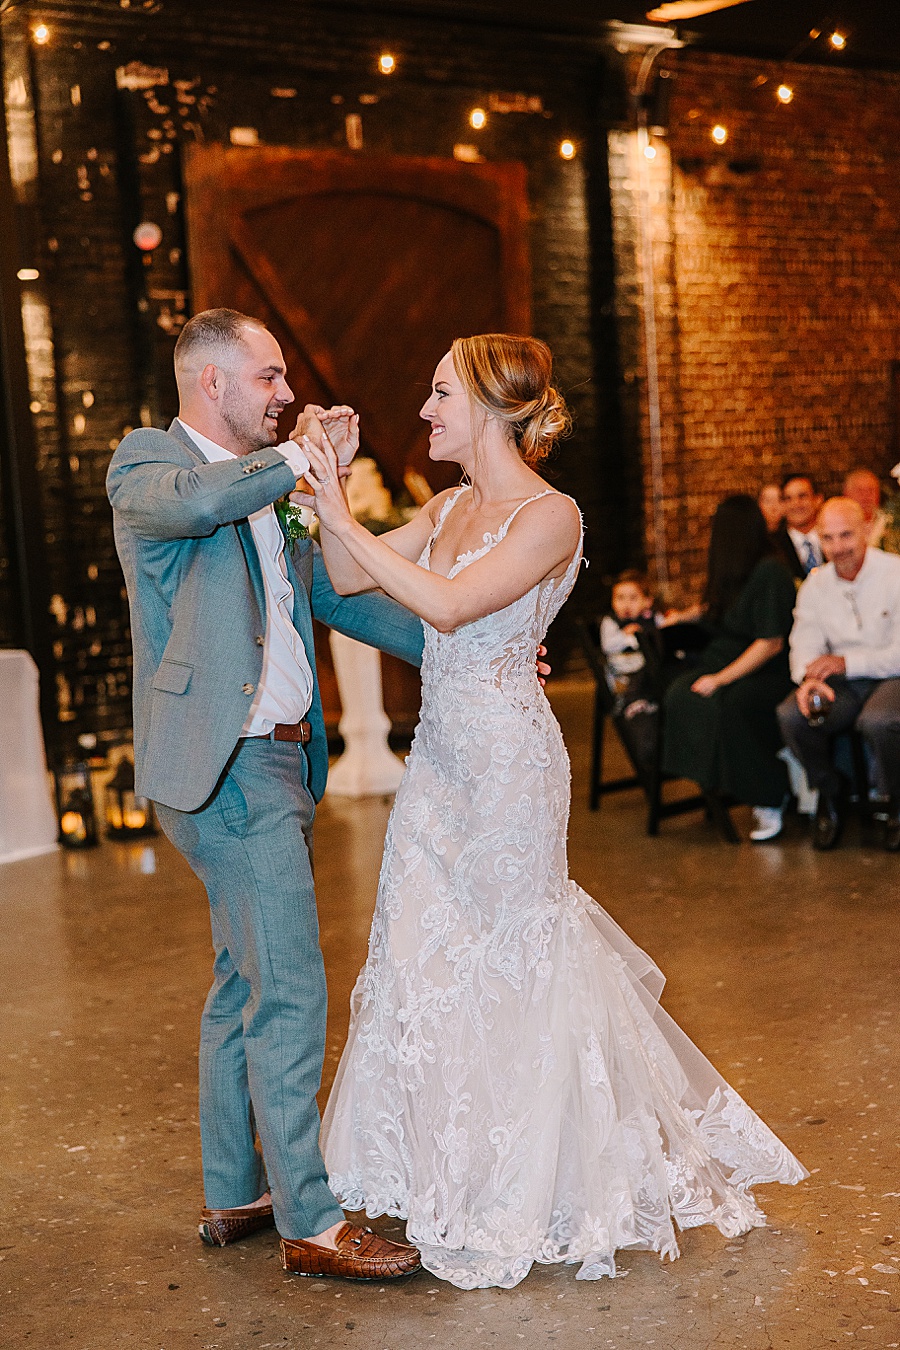 Bride and groom dancing at reception at Jackson Terminal events wedding in Knoxville TN by Mandy Hart Photo, Knoxville TN Wedding Photographer